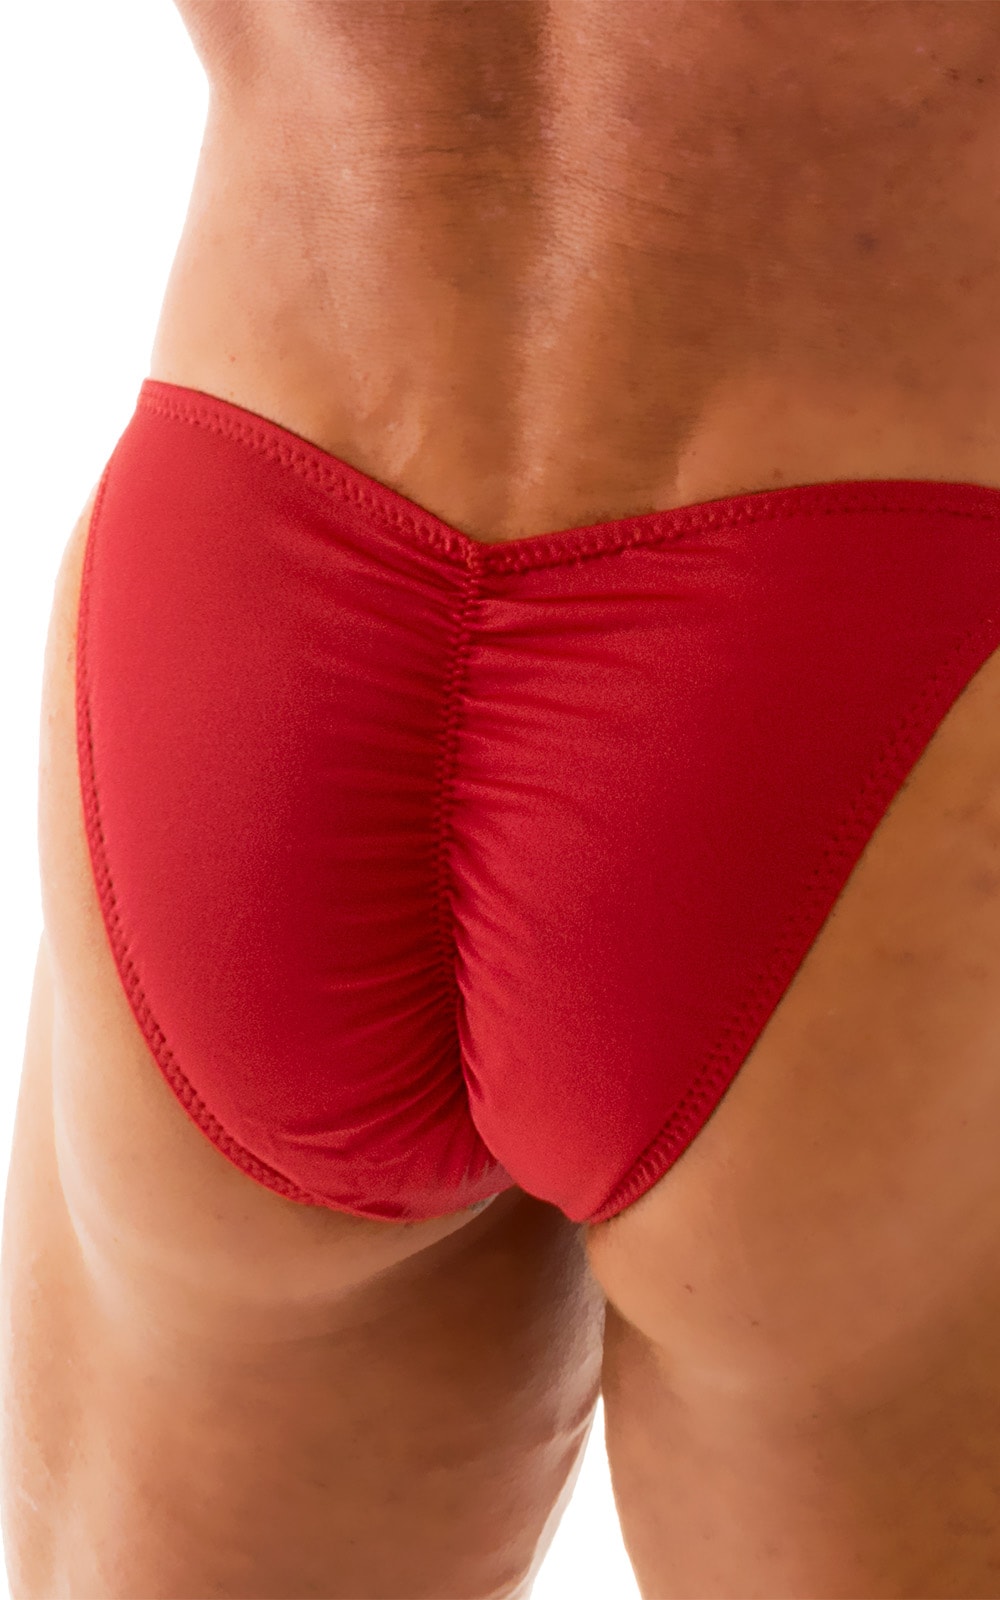 Fitted Pouch - Puckered Back - Bikini in Ruby 4